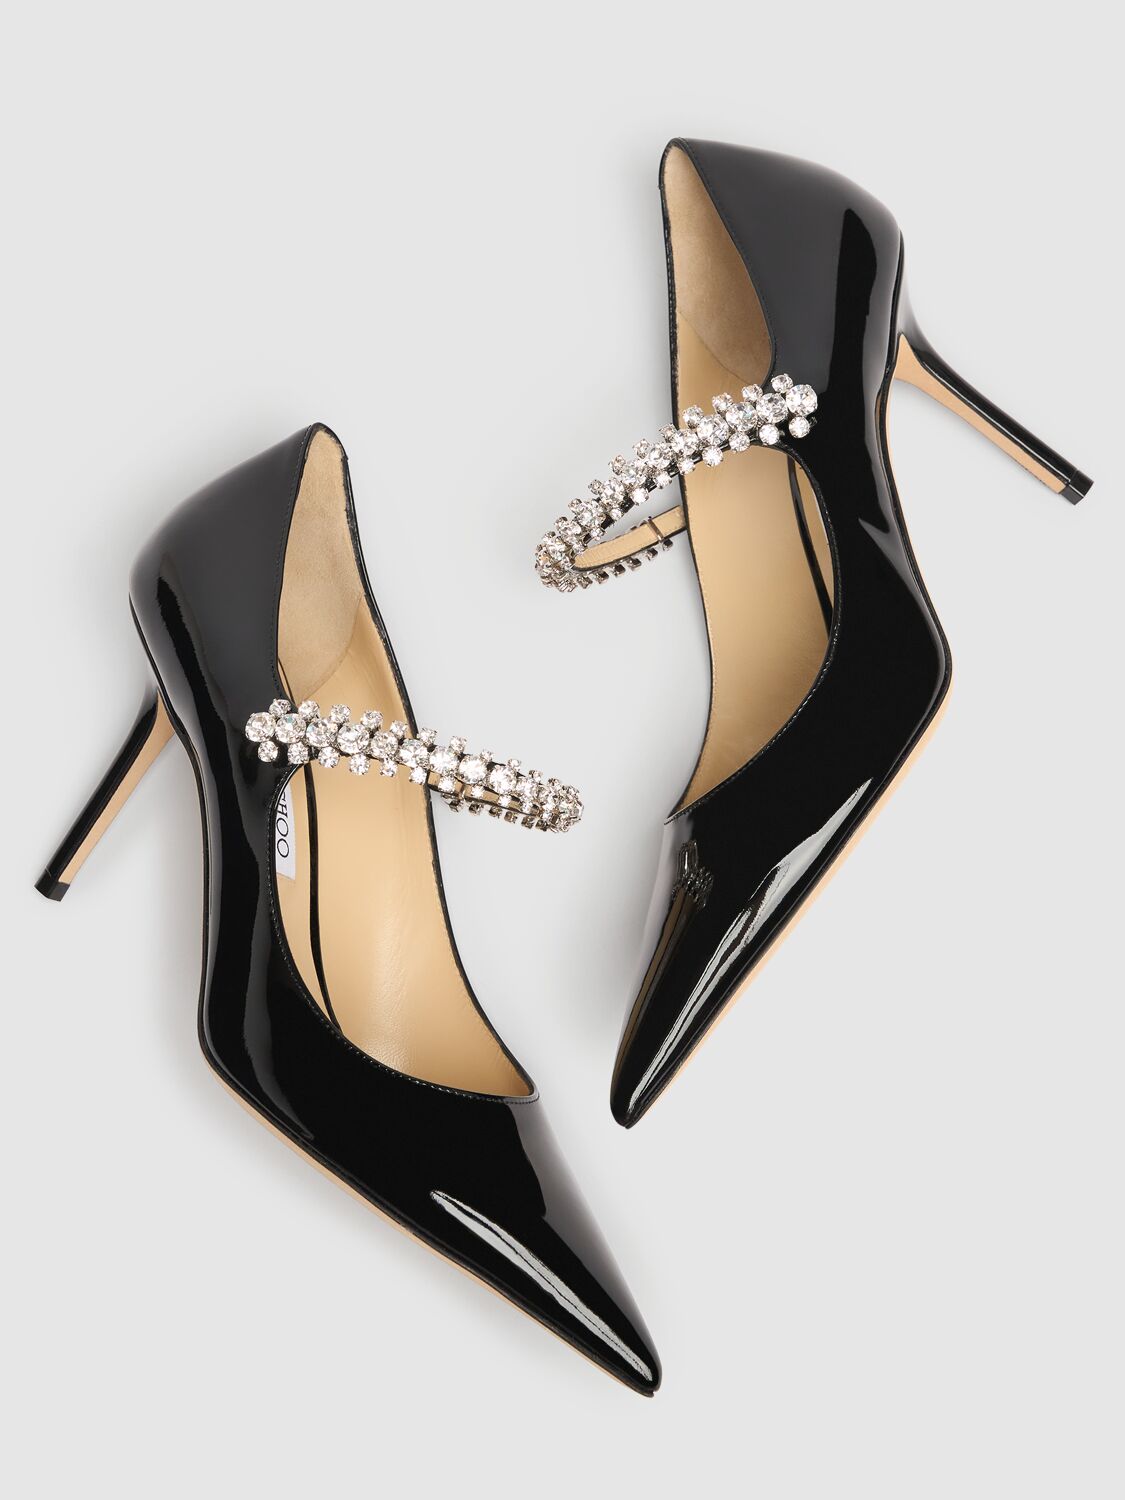 Shop Jimmy Choo 85mm Bling Patent Leather Pumps In Black